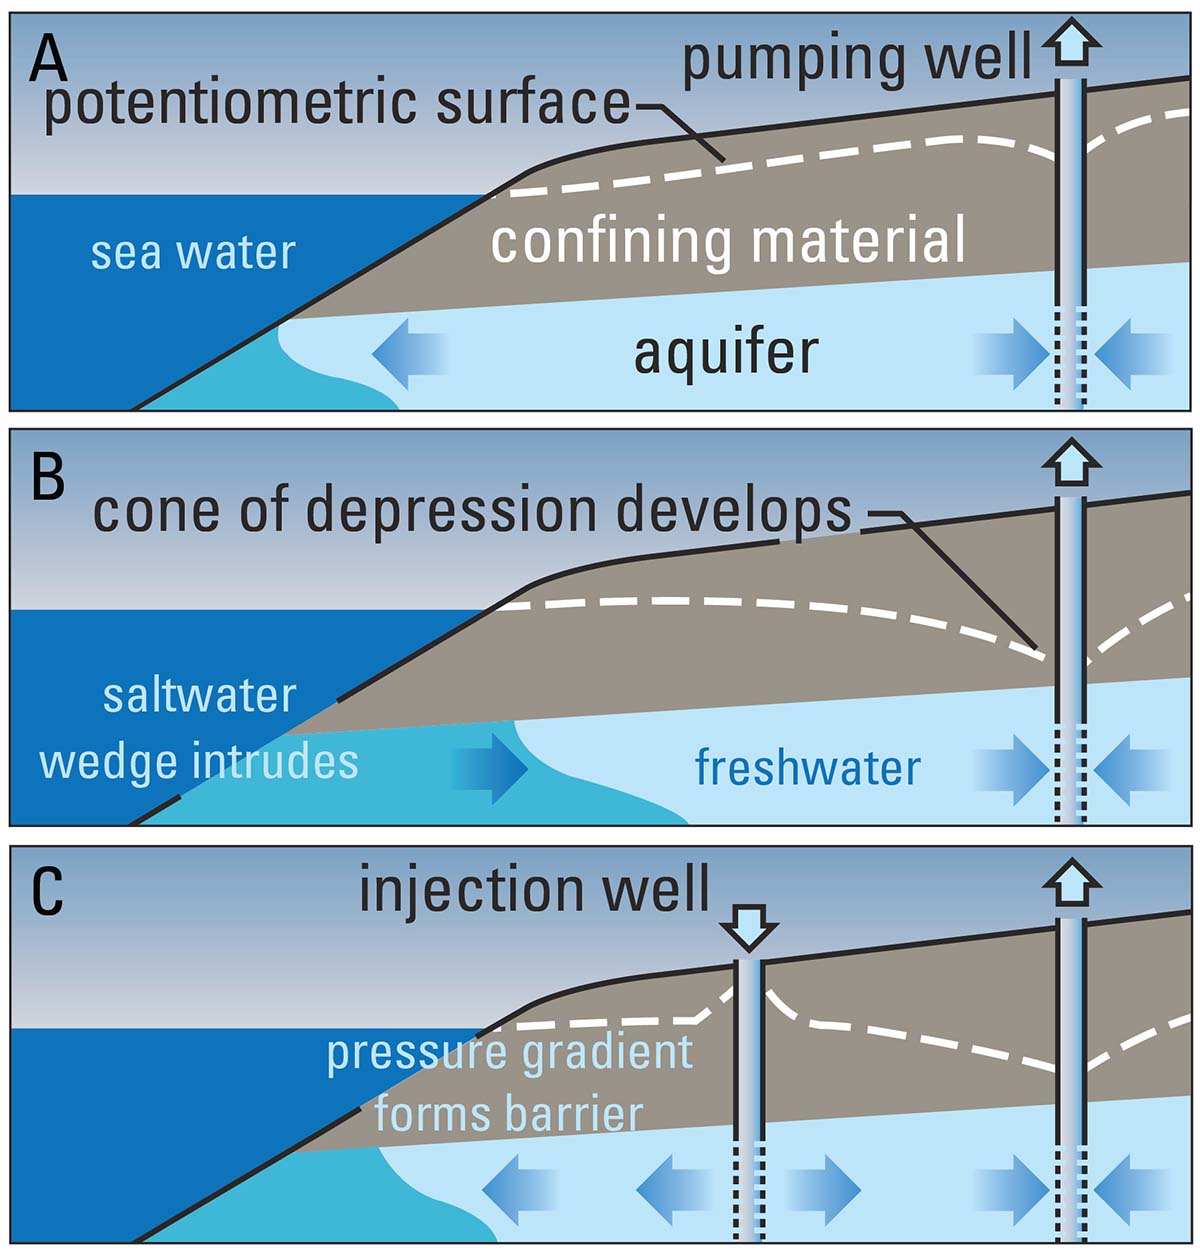 Illustration of how the seaward movement of freshwater prevents seawater from encroaching coastal aquifers.